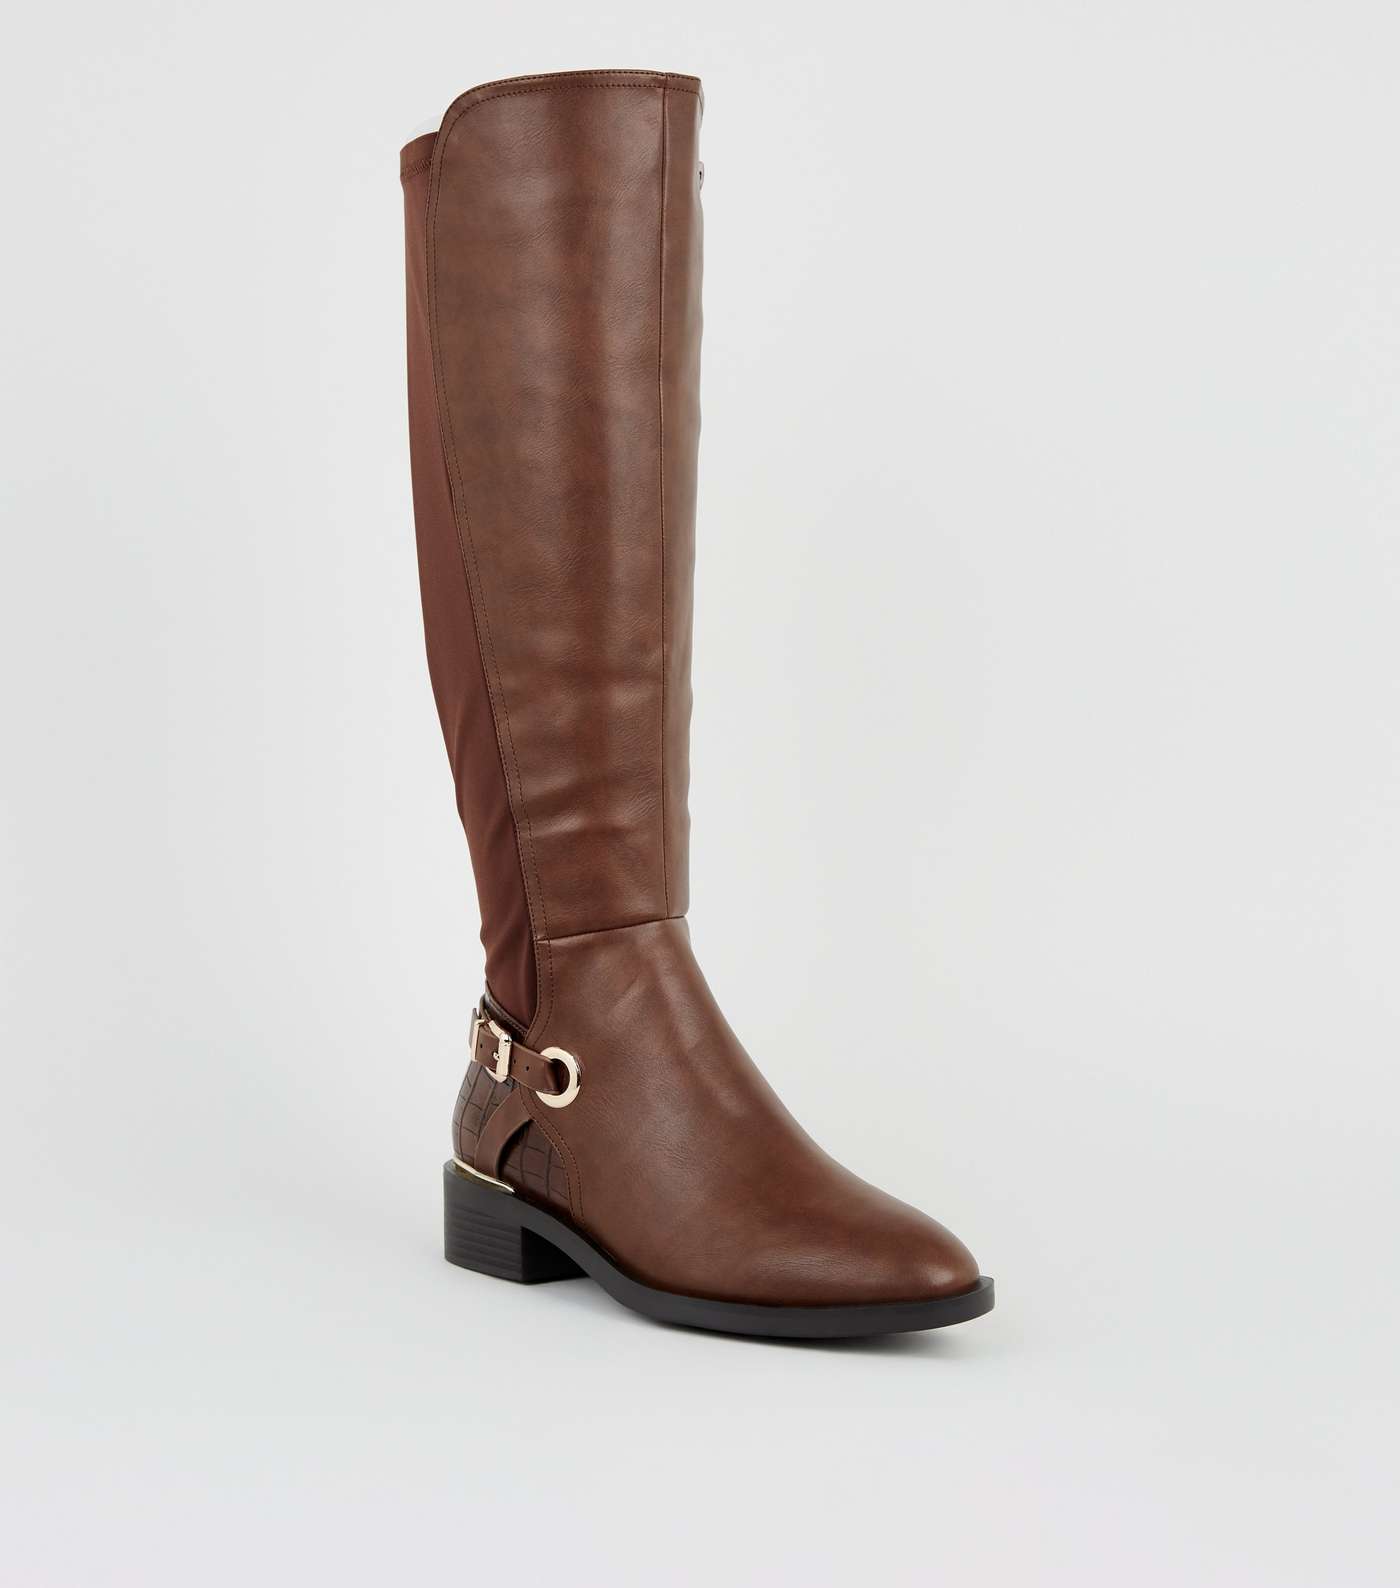 Extra Calf Fit Tan Leather-Look Knee High Boots